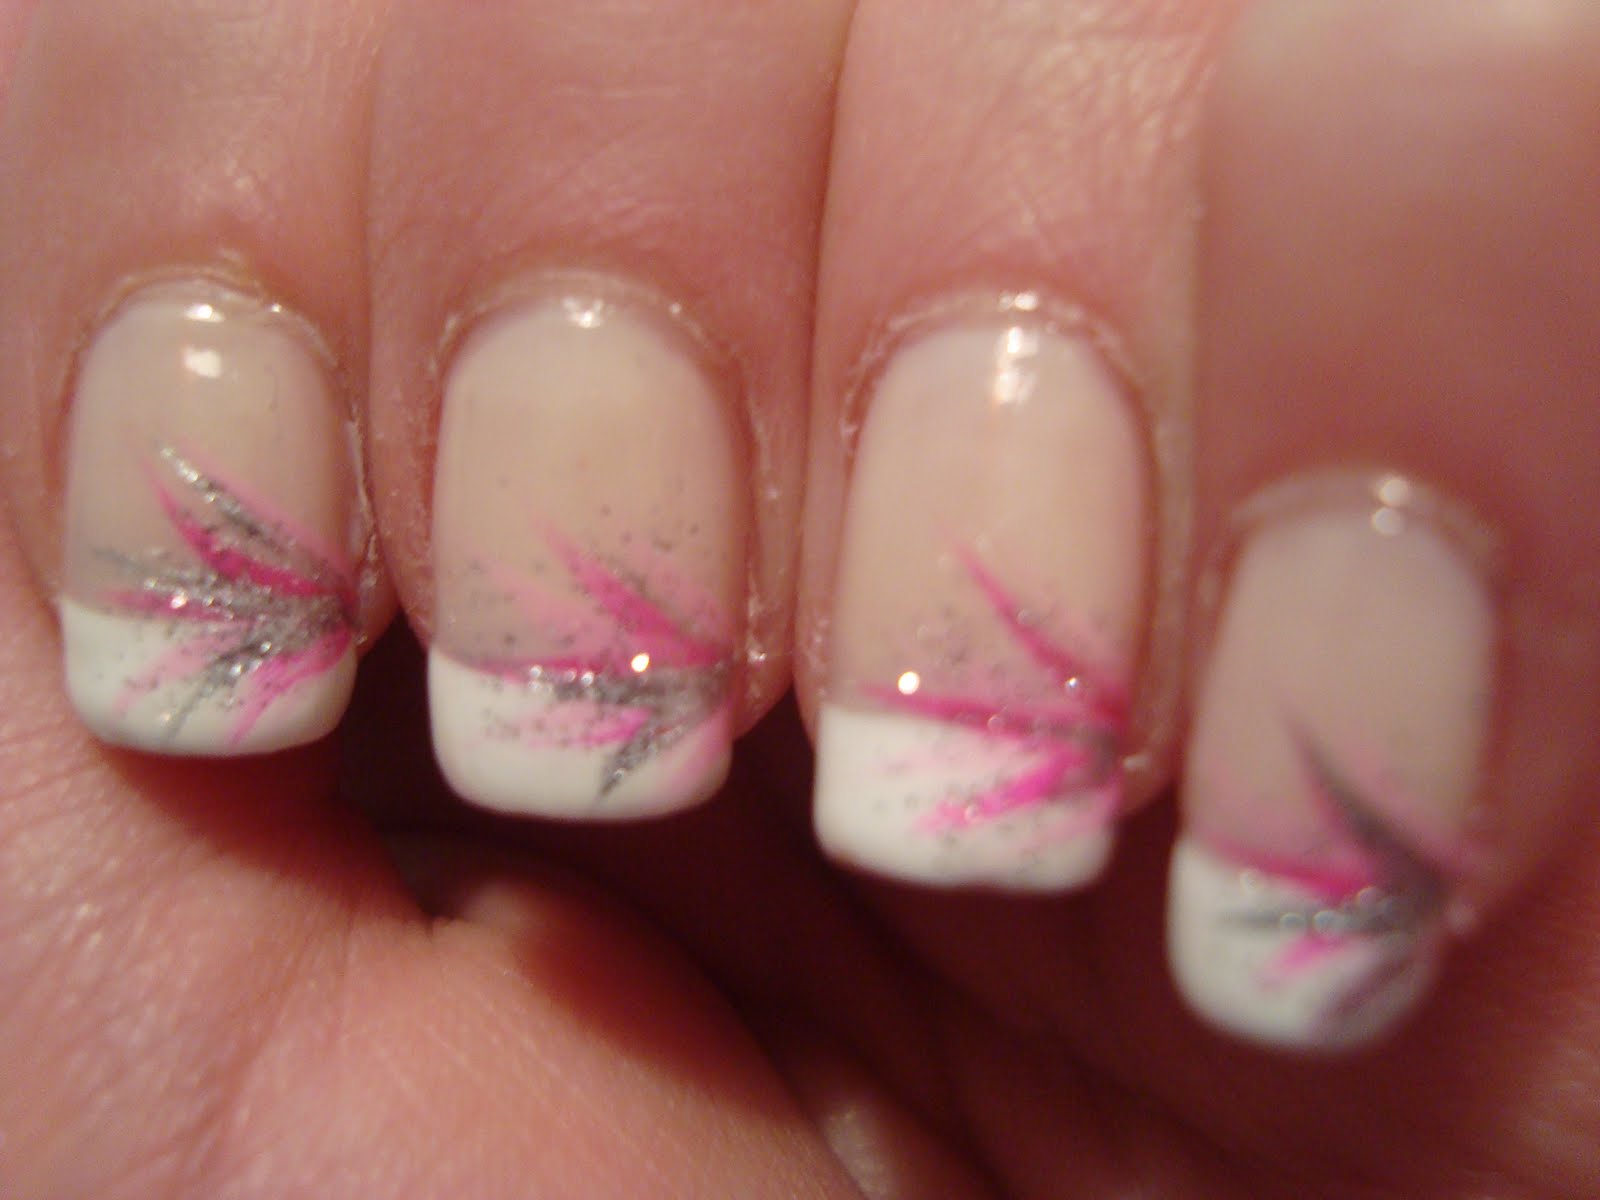 paint that nail: french tip manicure with pink